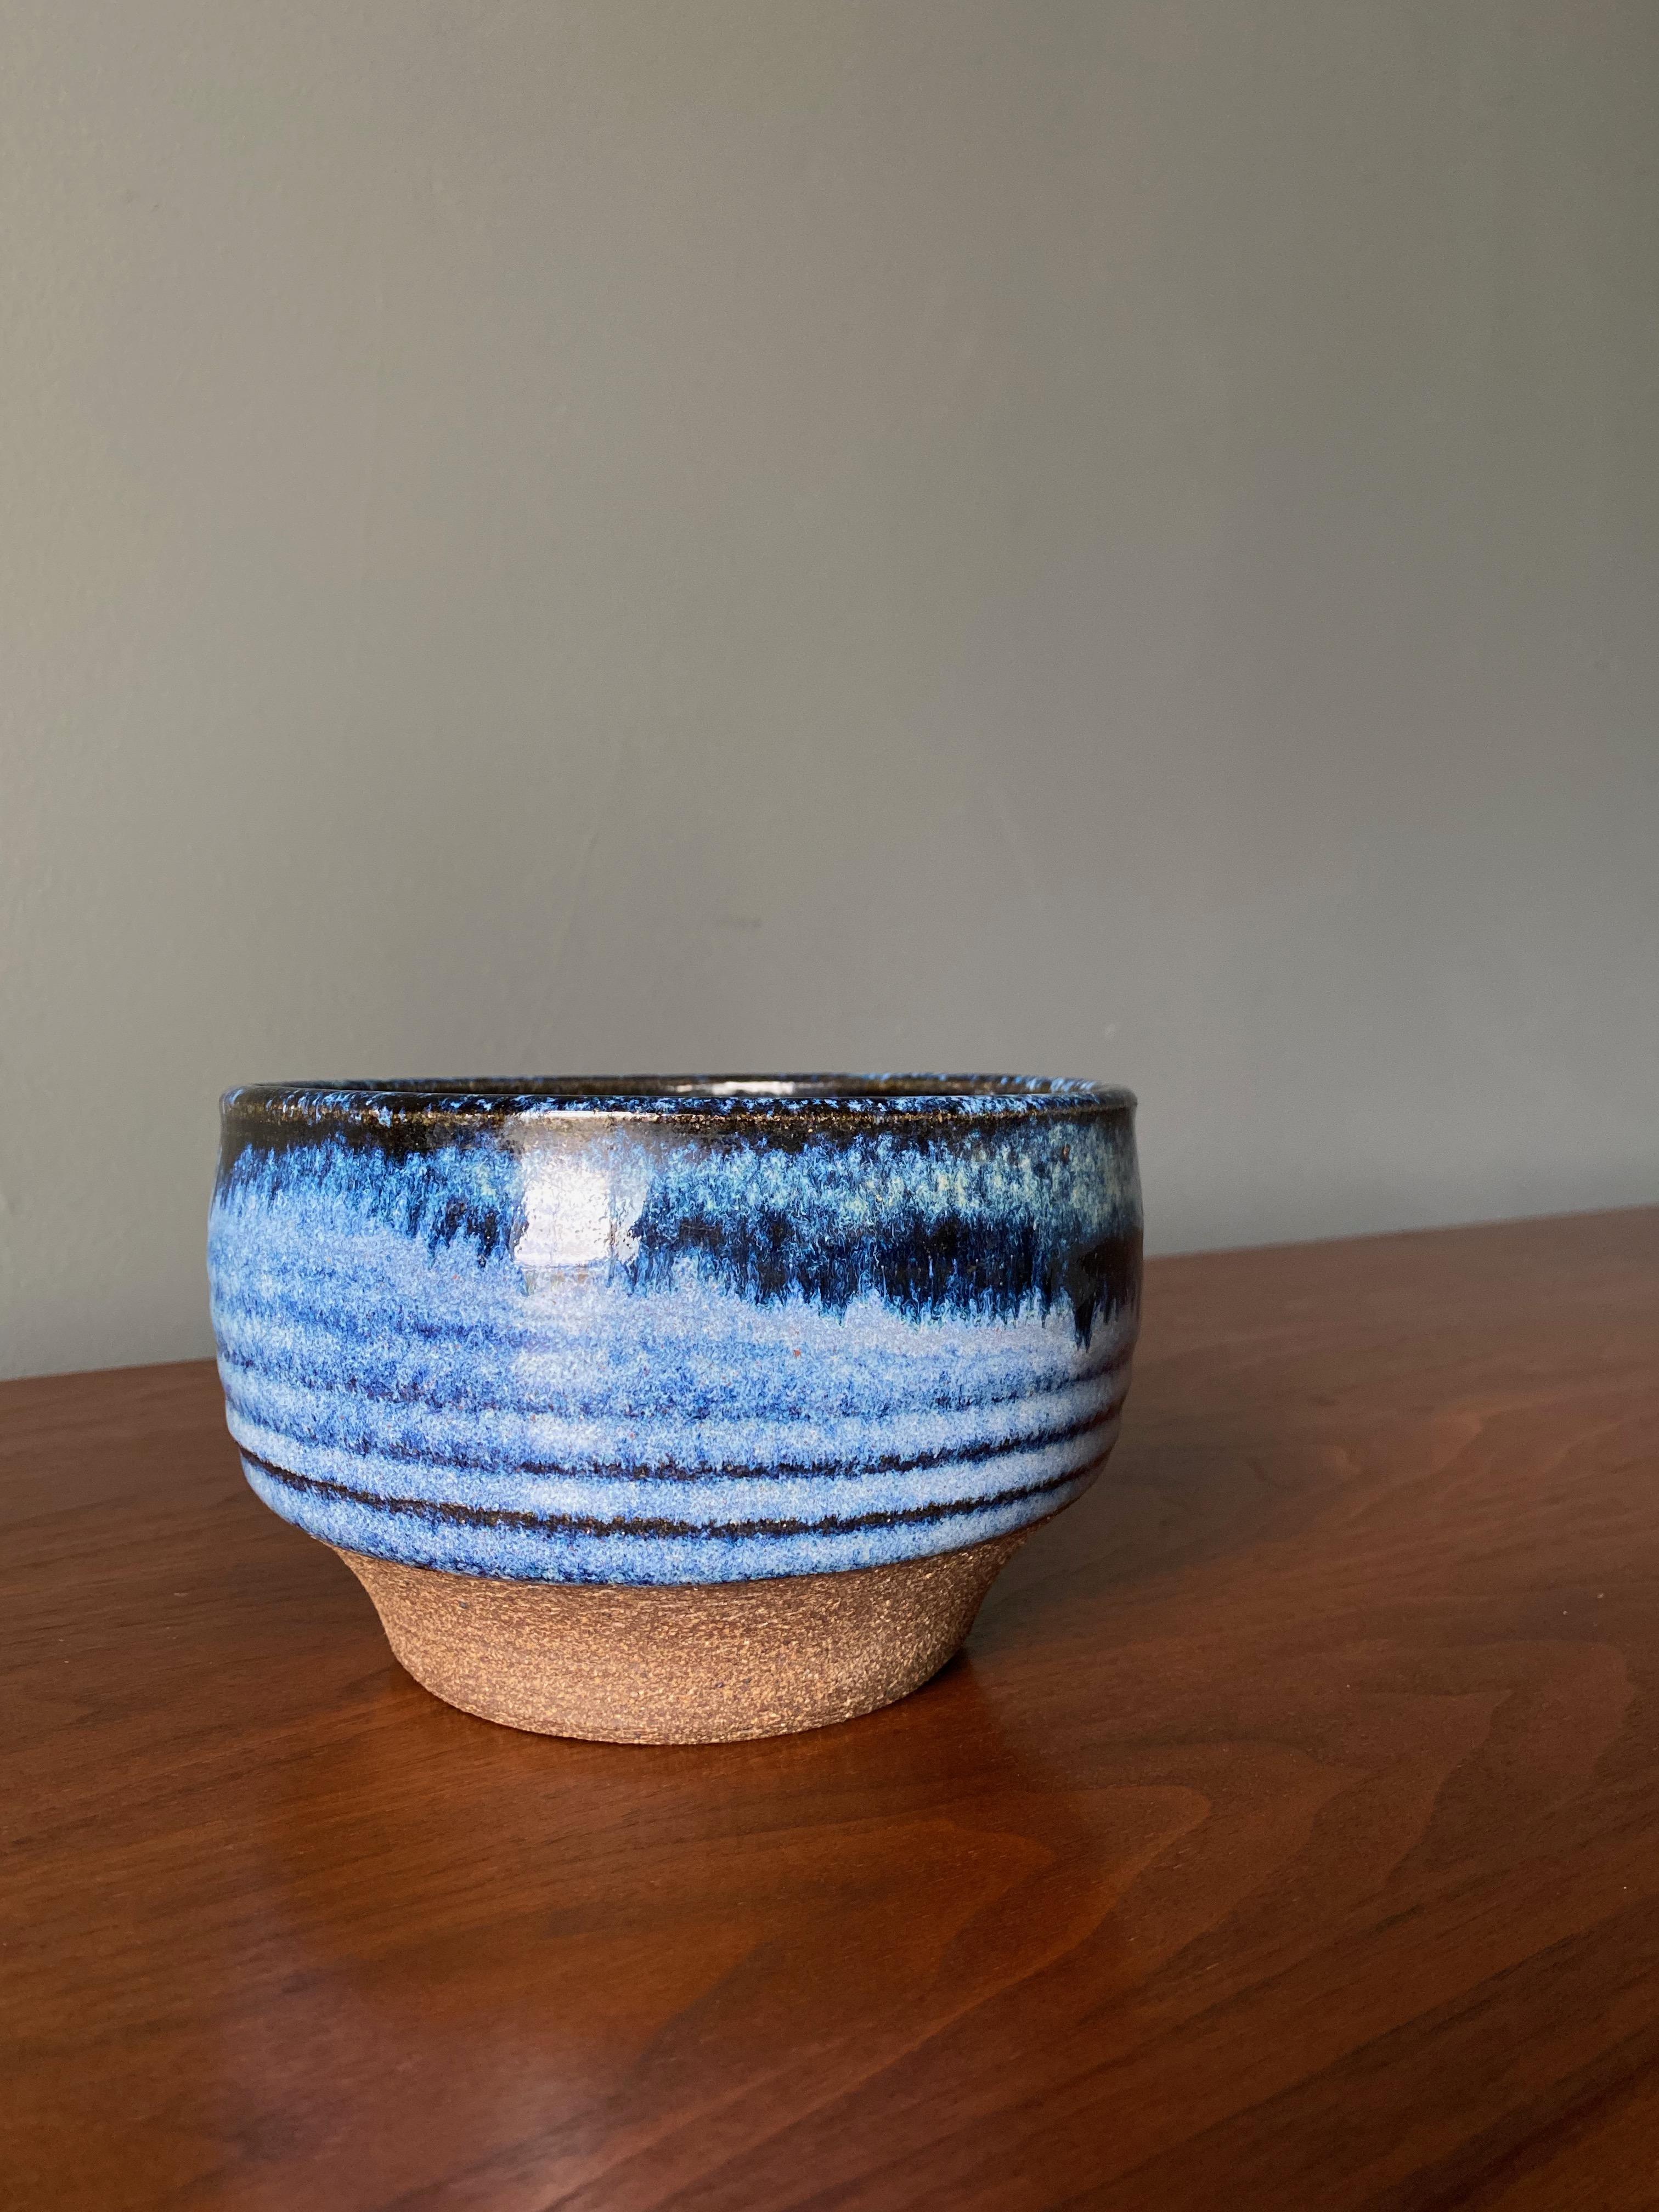 Studio ceramic planter. Beautiful blue glazing with contrasting rough clay lower section.